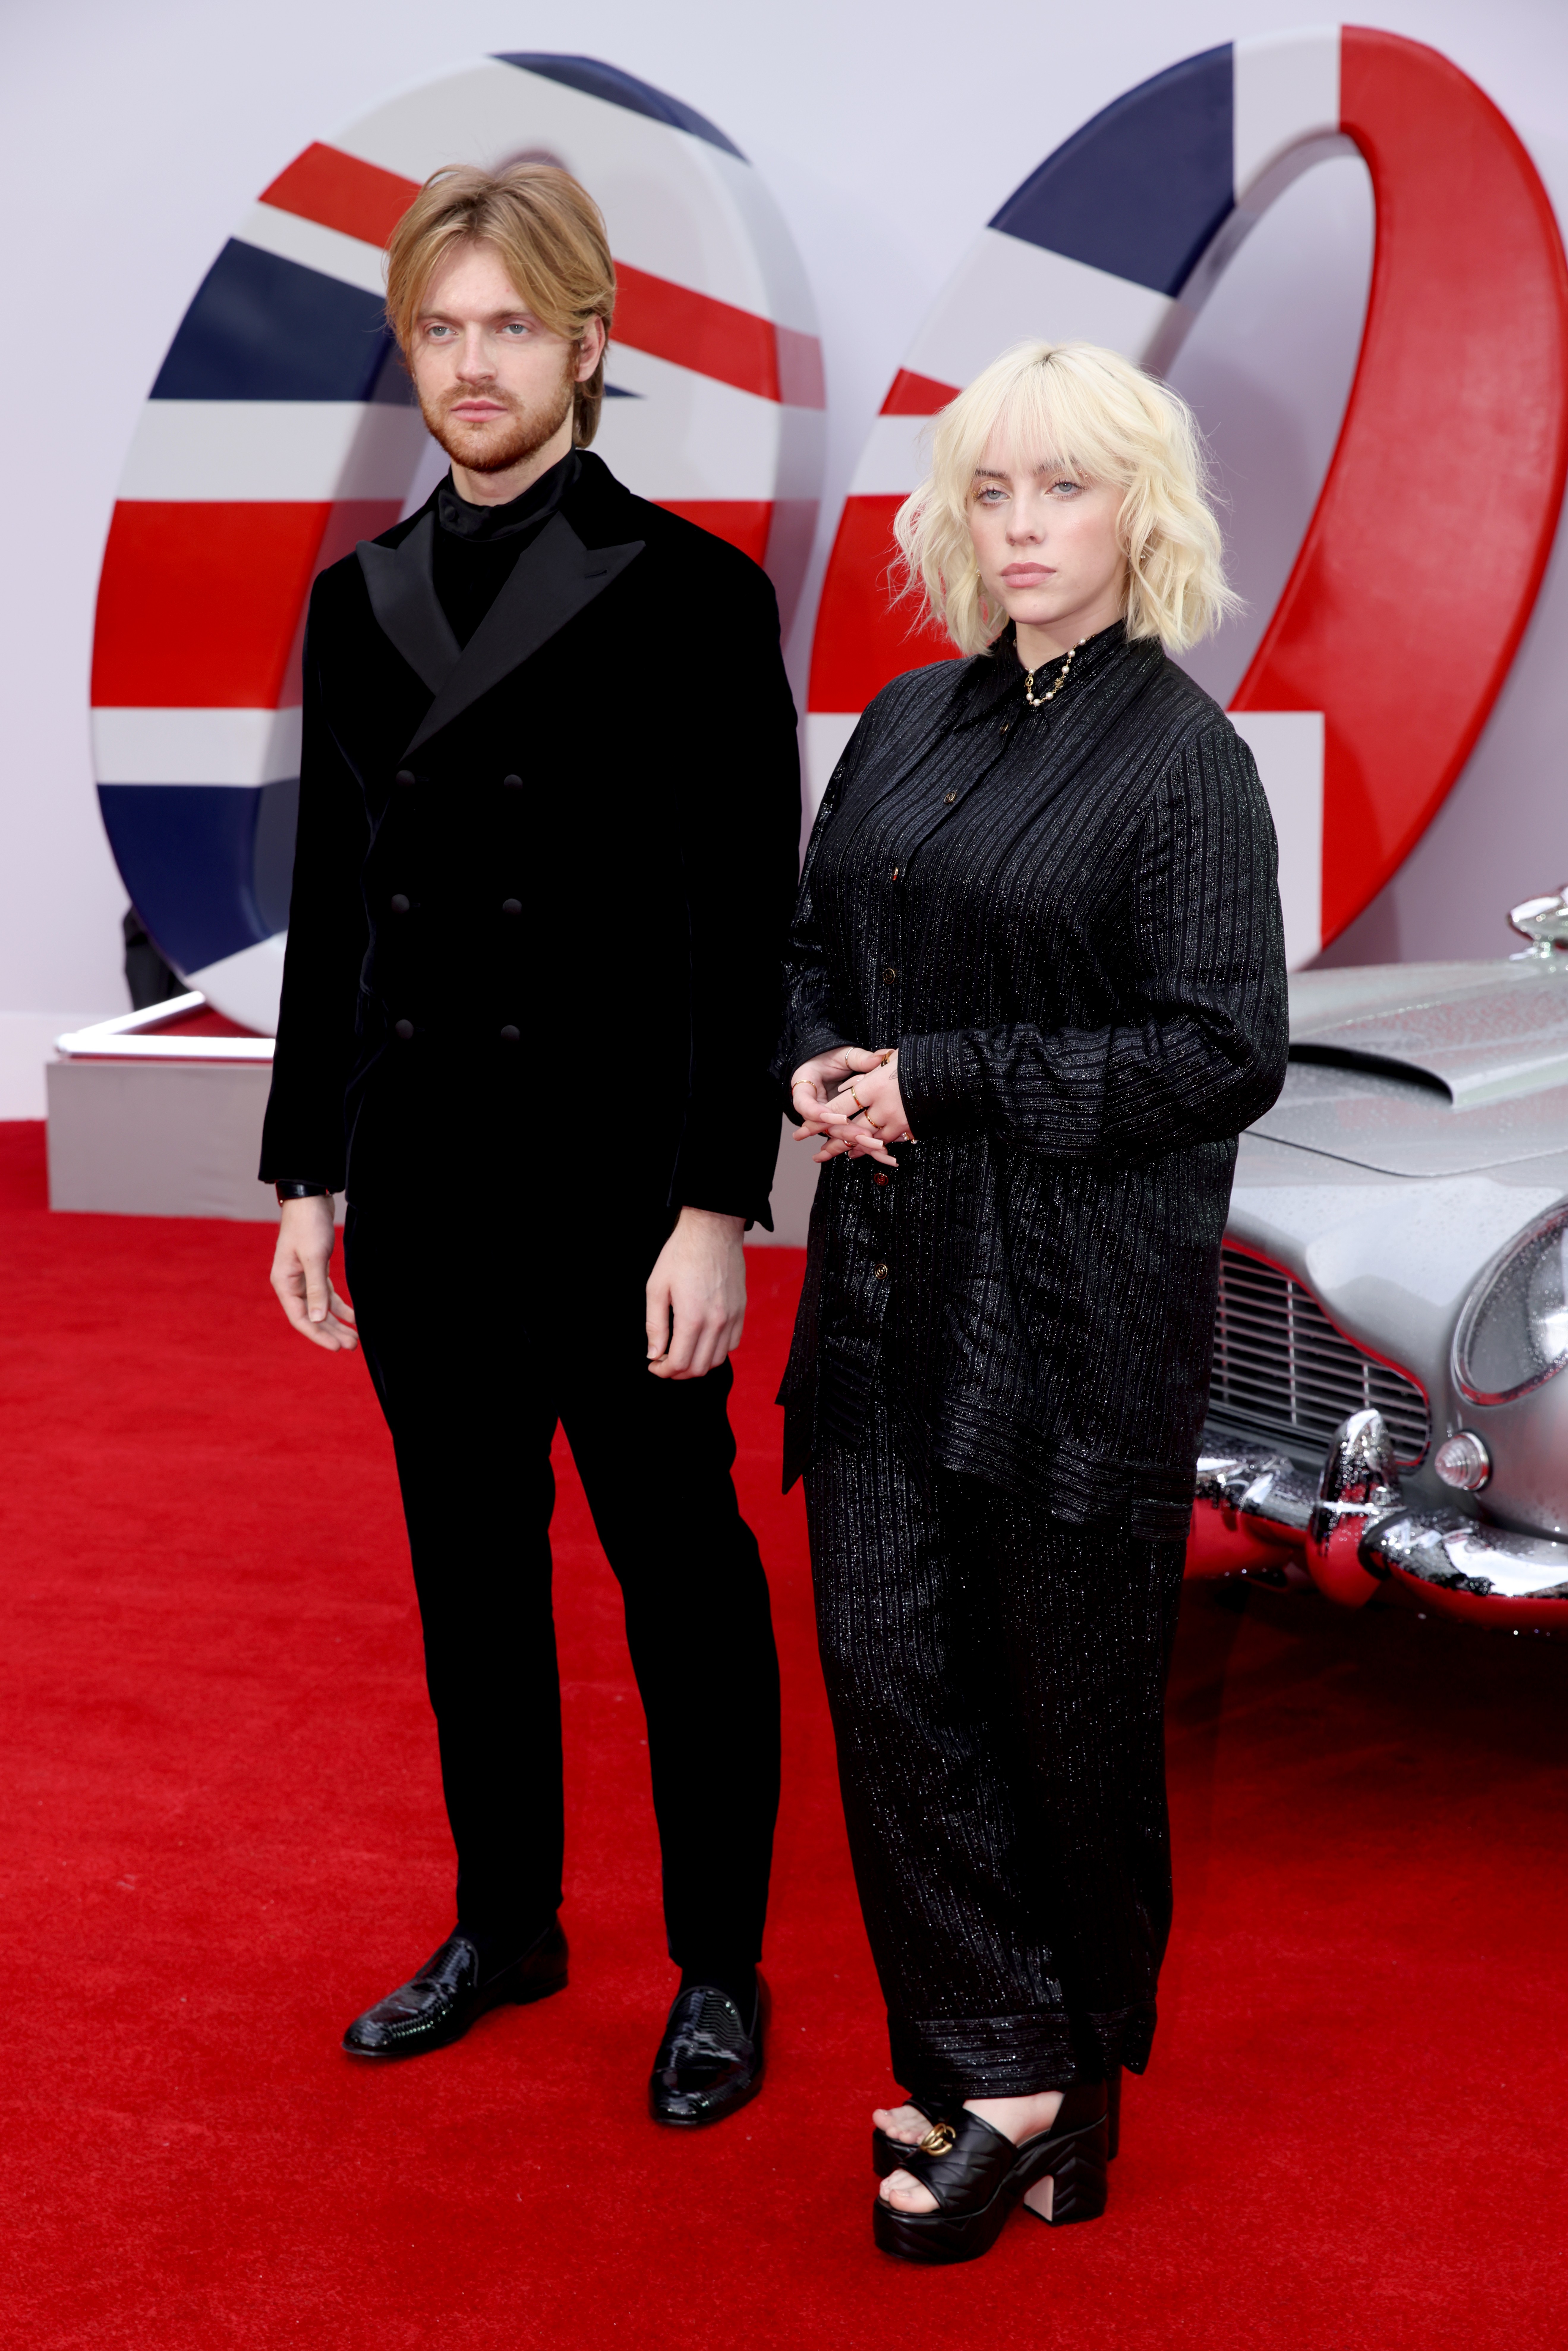 LONDON, ENGLAND - SEPTEMBER 28: Musicians Finneas and Billie Eilish attend the World Premiere of "NO TIME TO DIE" at the Royal Albert Hall on September 28, 2021 in London, England. (Photo by Tim P. Whitby/Getty Images for EON Productions, Metro-Goldwyn-Ma (Foto: Getty Images for EON Productions)